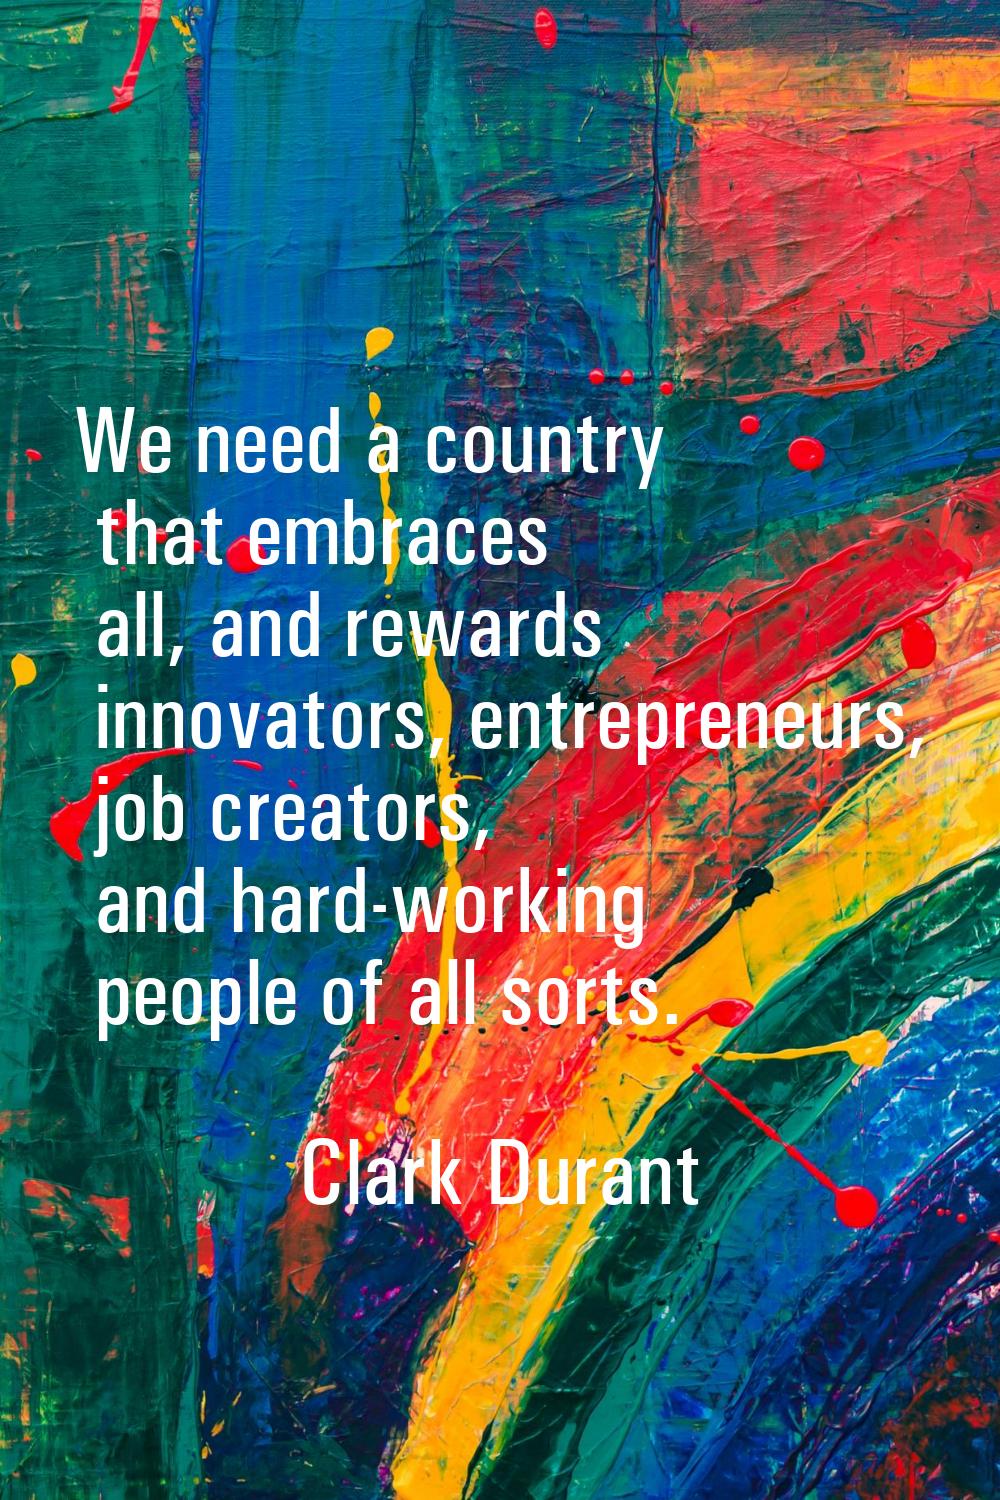 We need a country that embraces all, and rewards innovators, entrepreneurs, job creators, and hard-